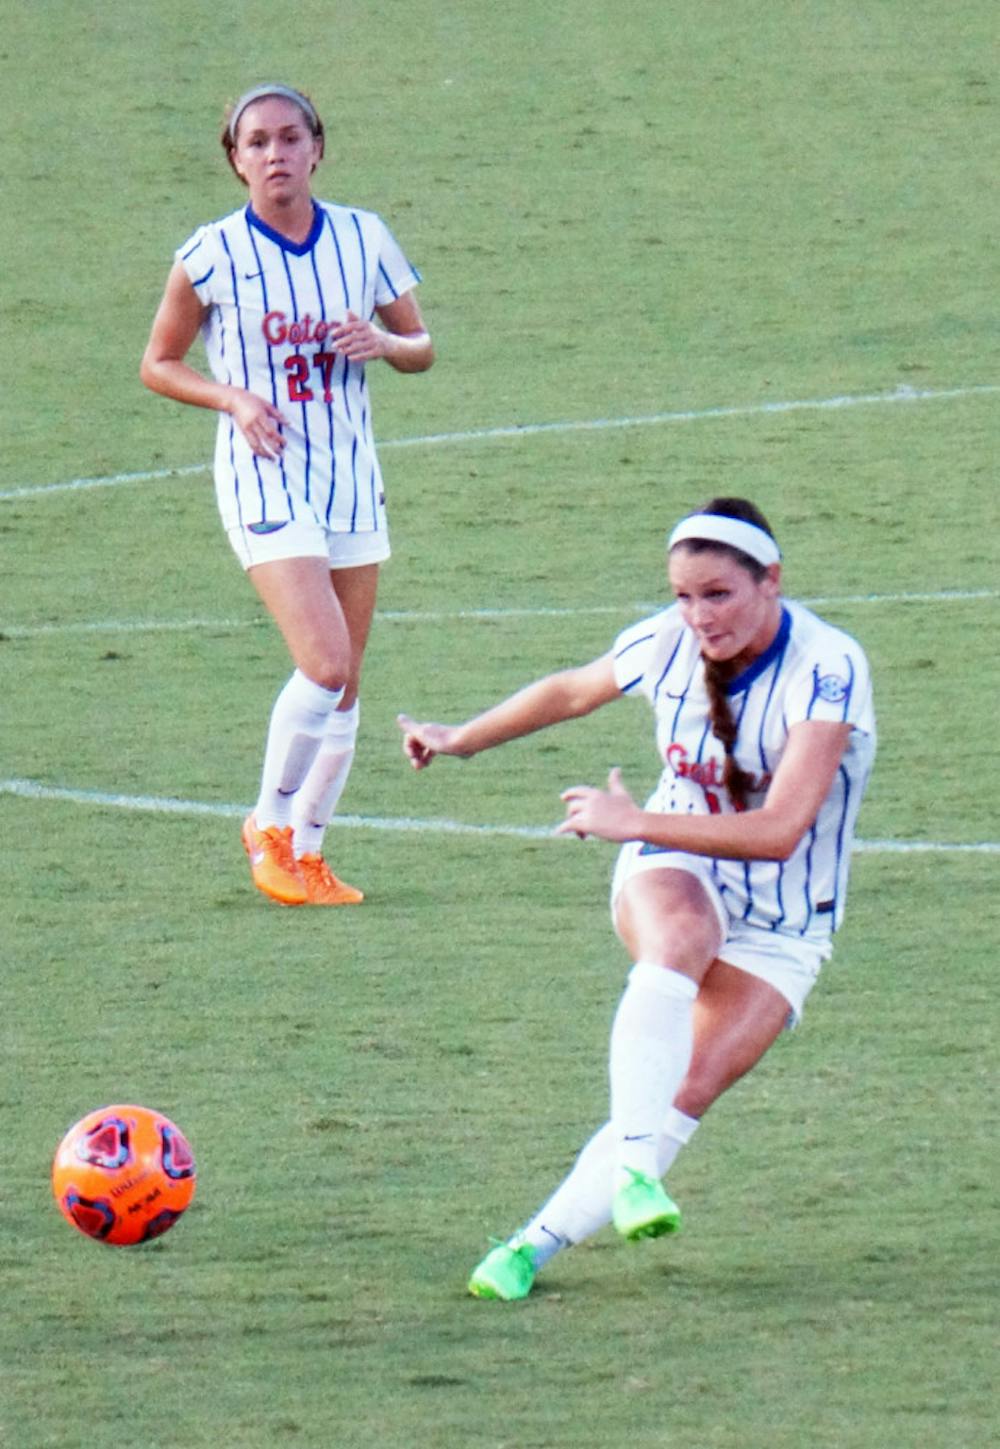 <p>UF forward Brooke Sharp shoots during Florida's 2-1 loss to Texas A&amp;M on Sept. 10, 2015 at Donald R. Dizney Stadium.</p>